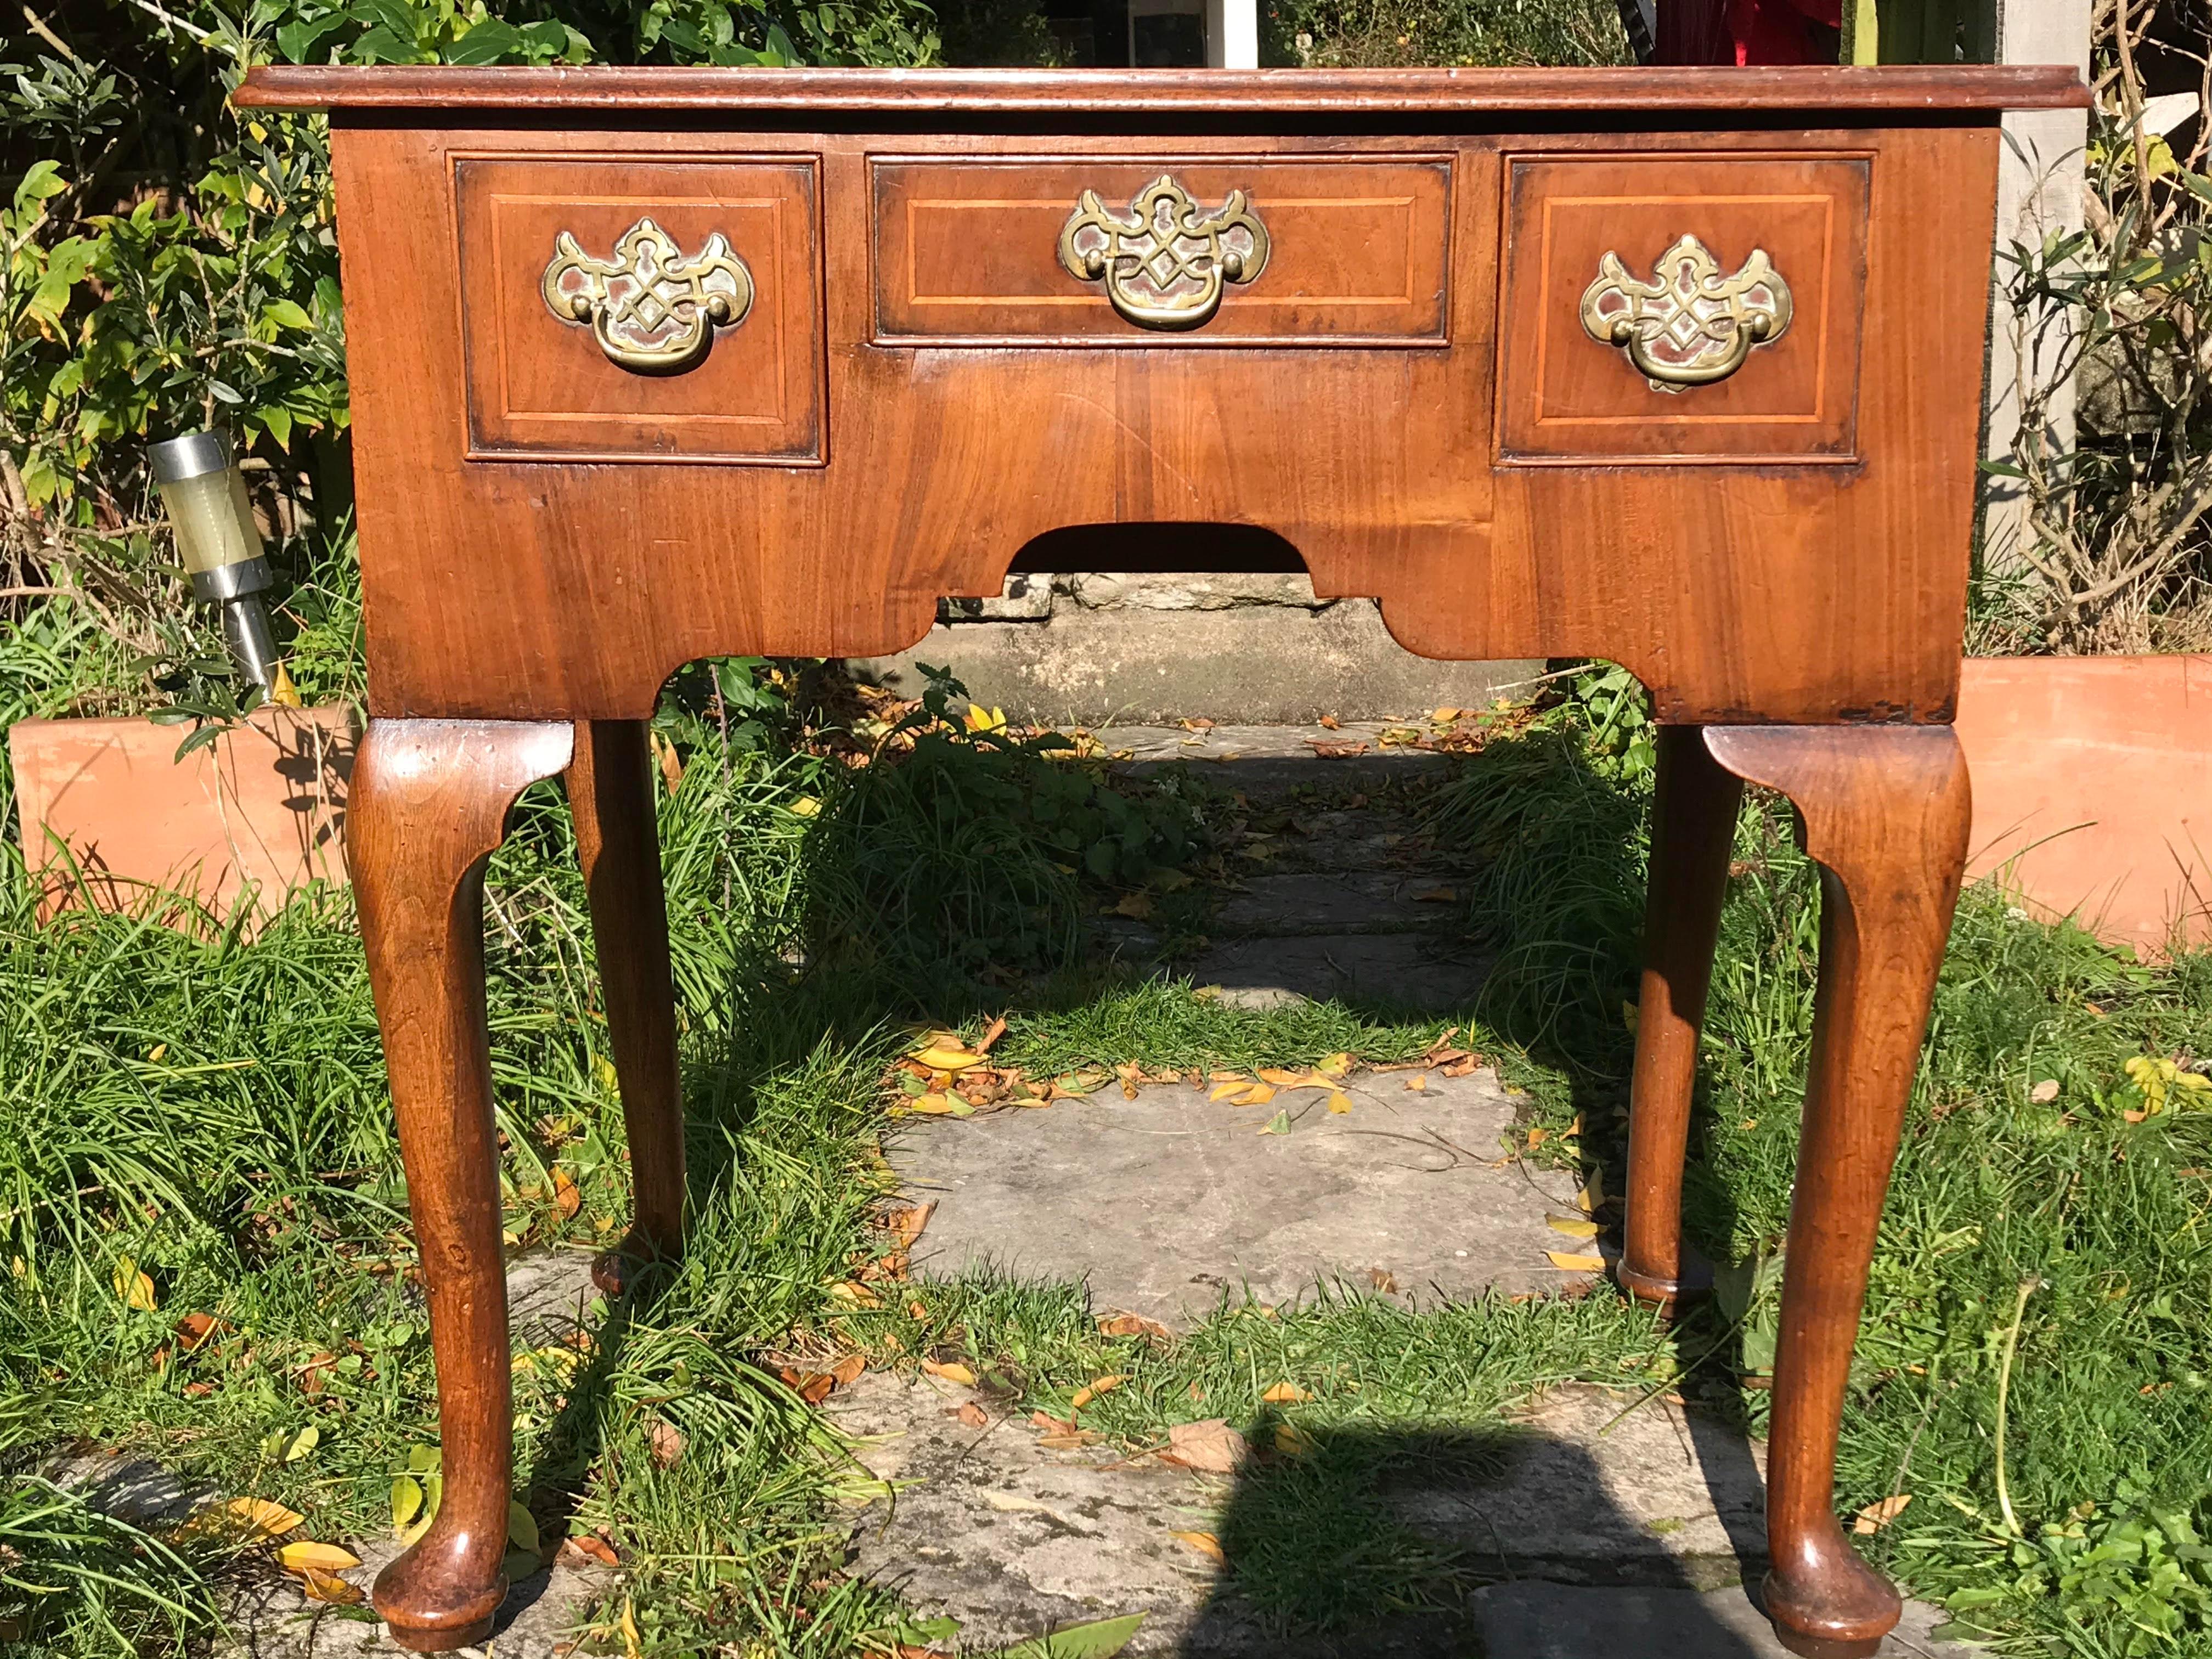 A compact-sized 18th-century walnut lowboy / dressing table / vanity.
George II period, circa 1750.

Raised on cabriole legs, this small English walnut table is only 2' 5'' wide.
Retaining its original open-fret brasses, which are typical of the